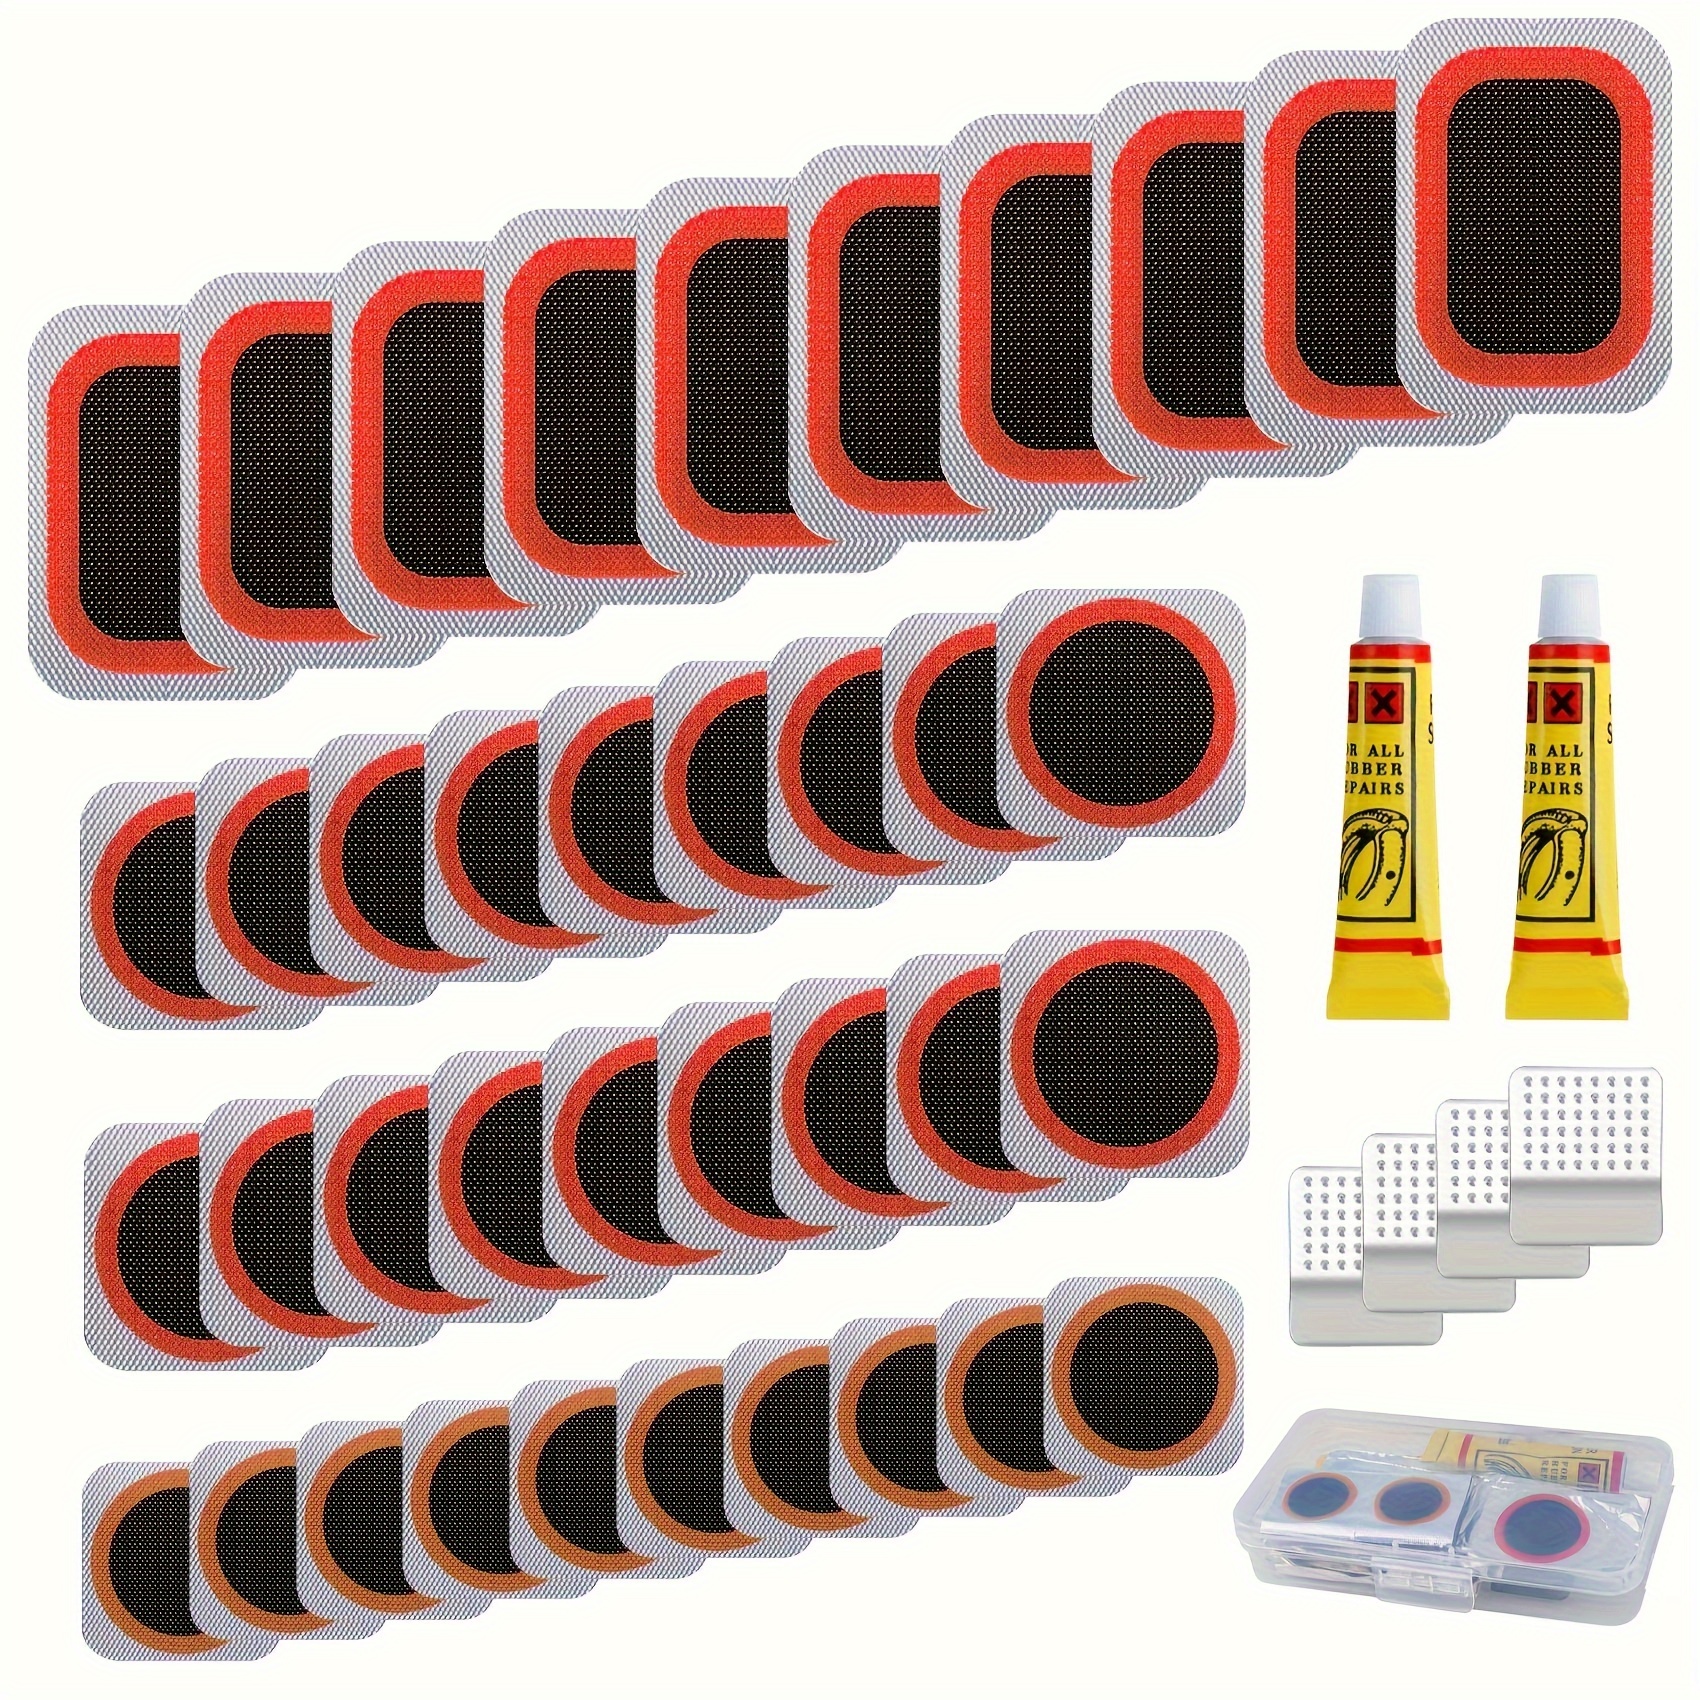 

Heavy-duty Rubber Bicycle Tire Repair Kit With 32 Vulcanizing Patches, Metal Rasp, And Adhesive For All Bike Types - Essential Tube Patch Tools For Cycling Enthusiasts